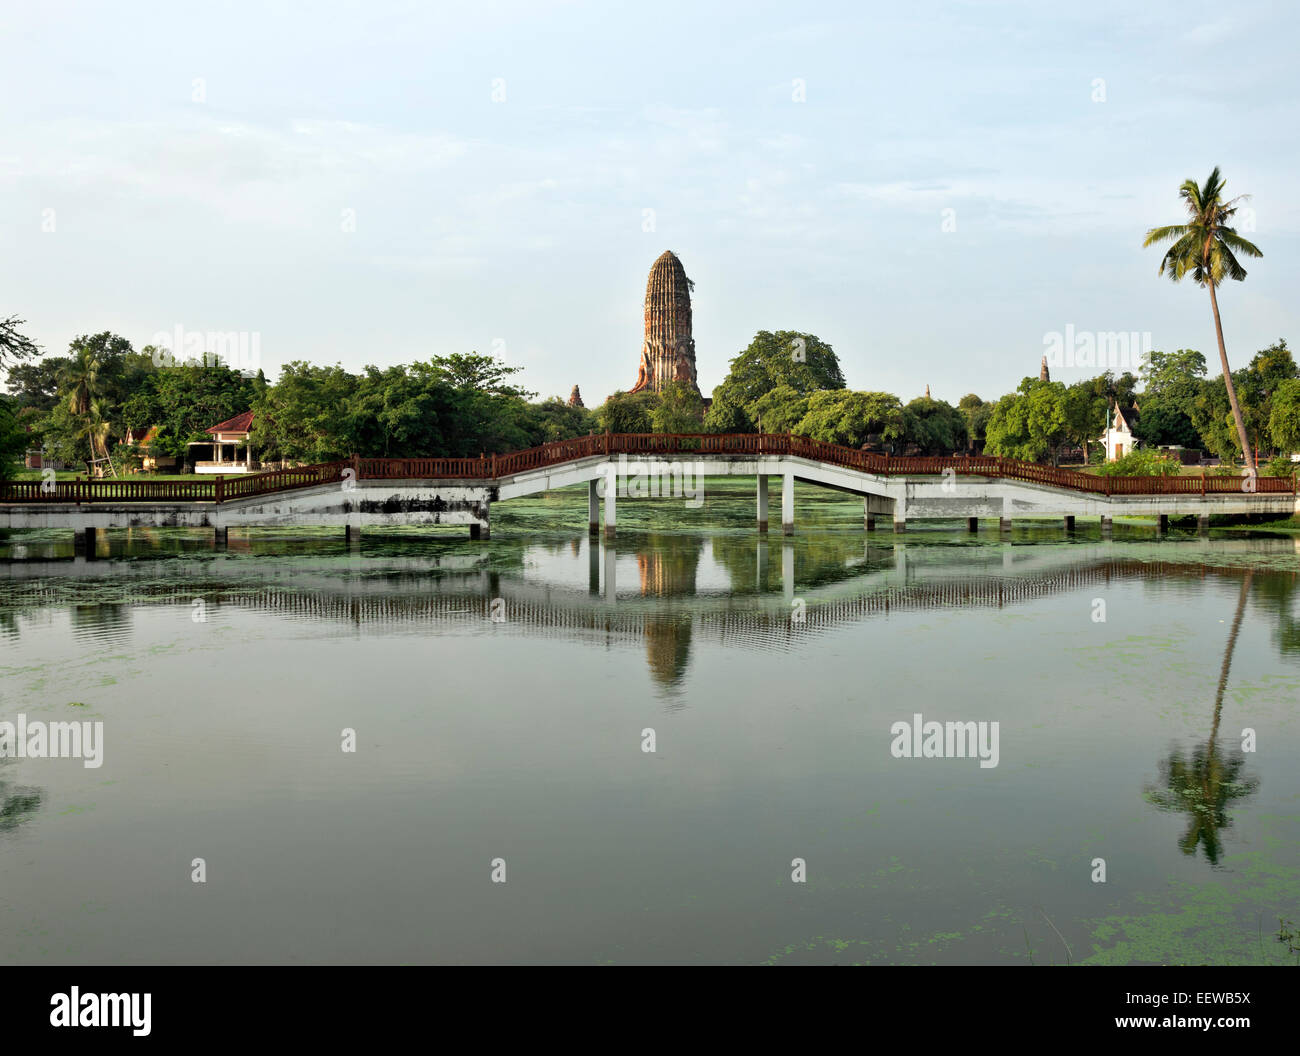 TH00326-00...THAILAND - Bridge over a canal in the Phra Ram Park located at the center of the Ayutthaya Historical Park and the Stock Photo